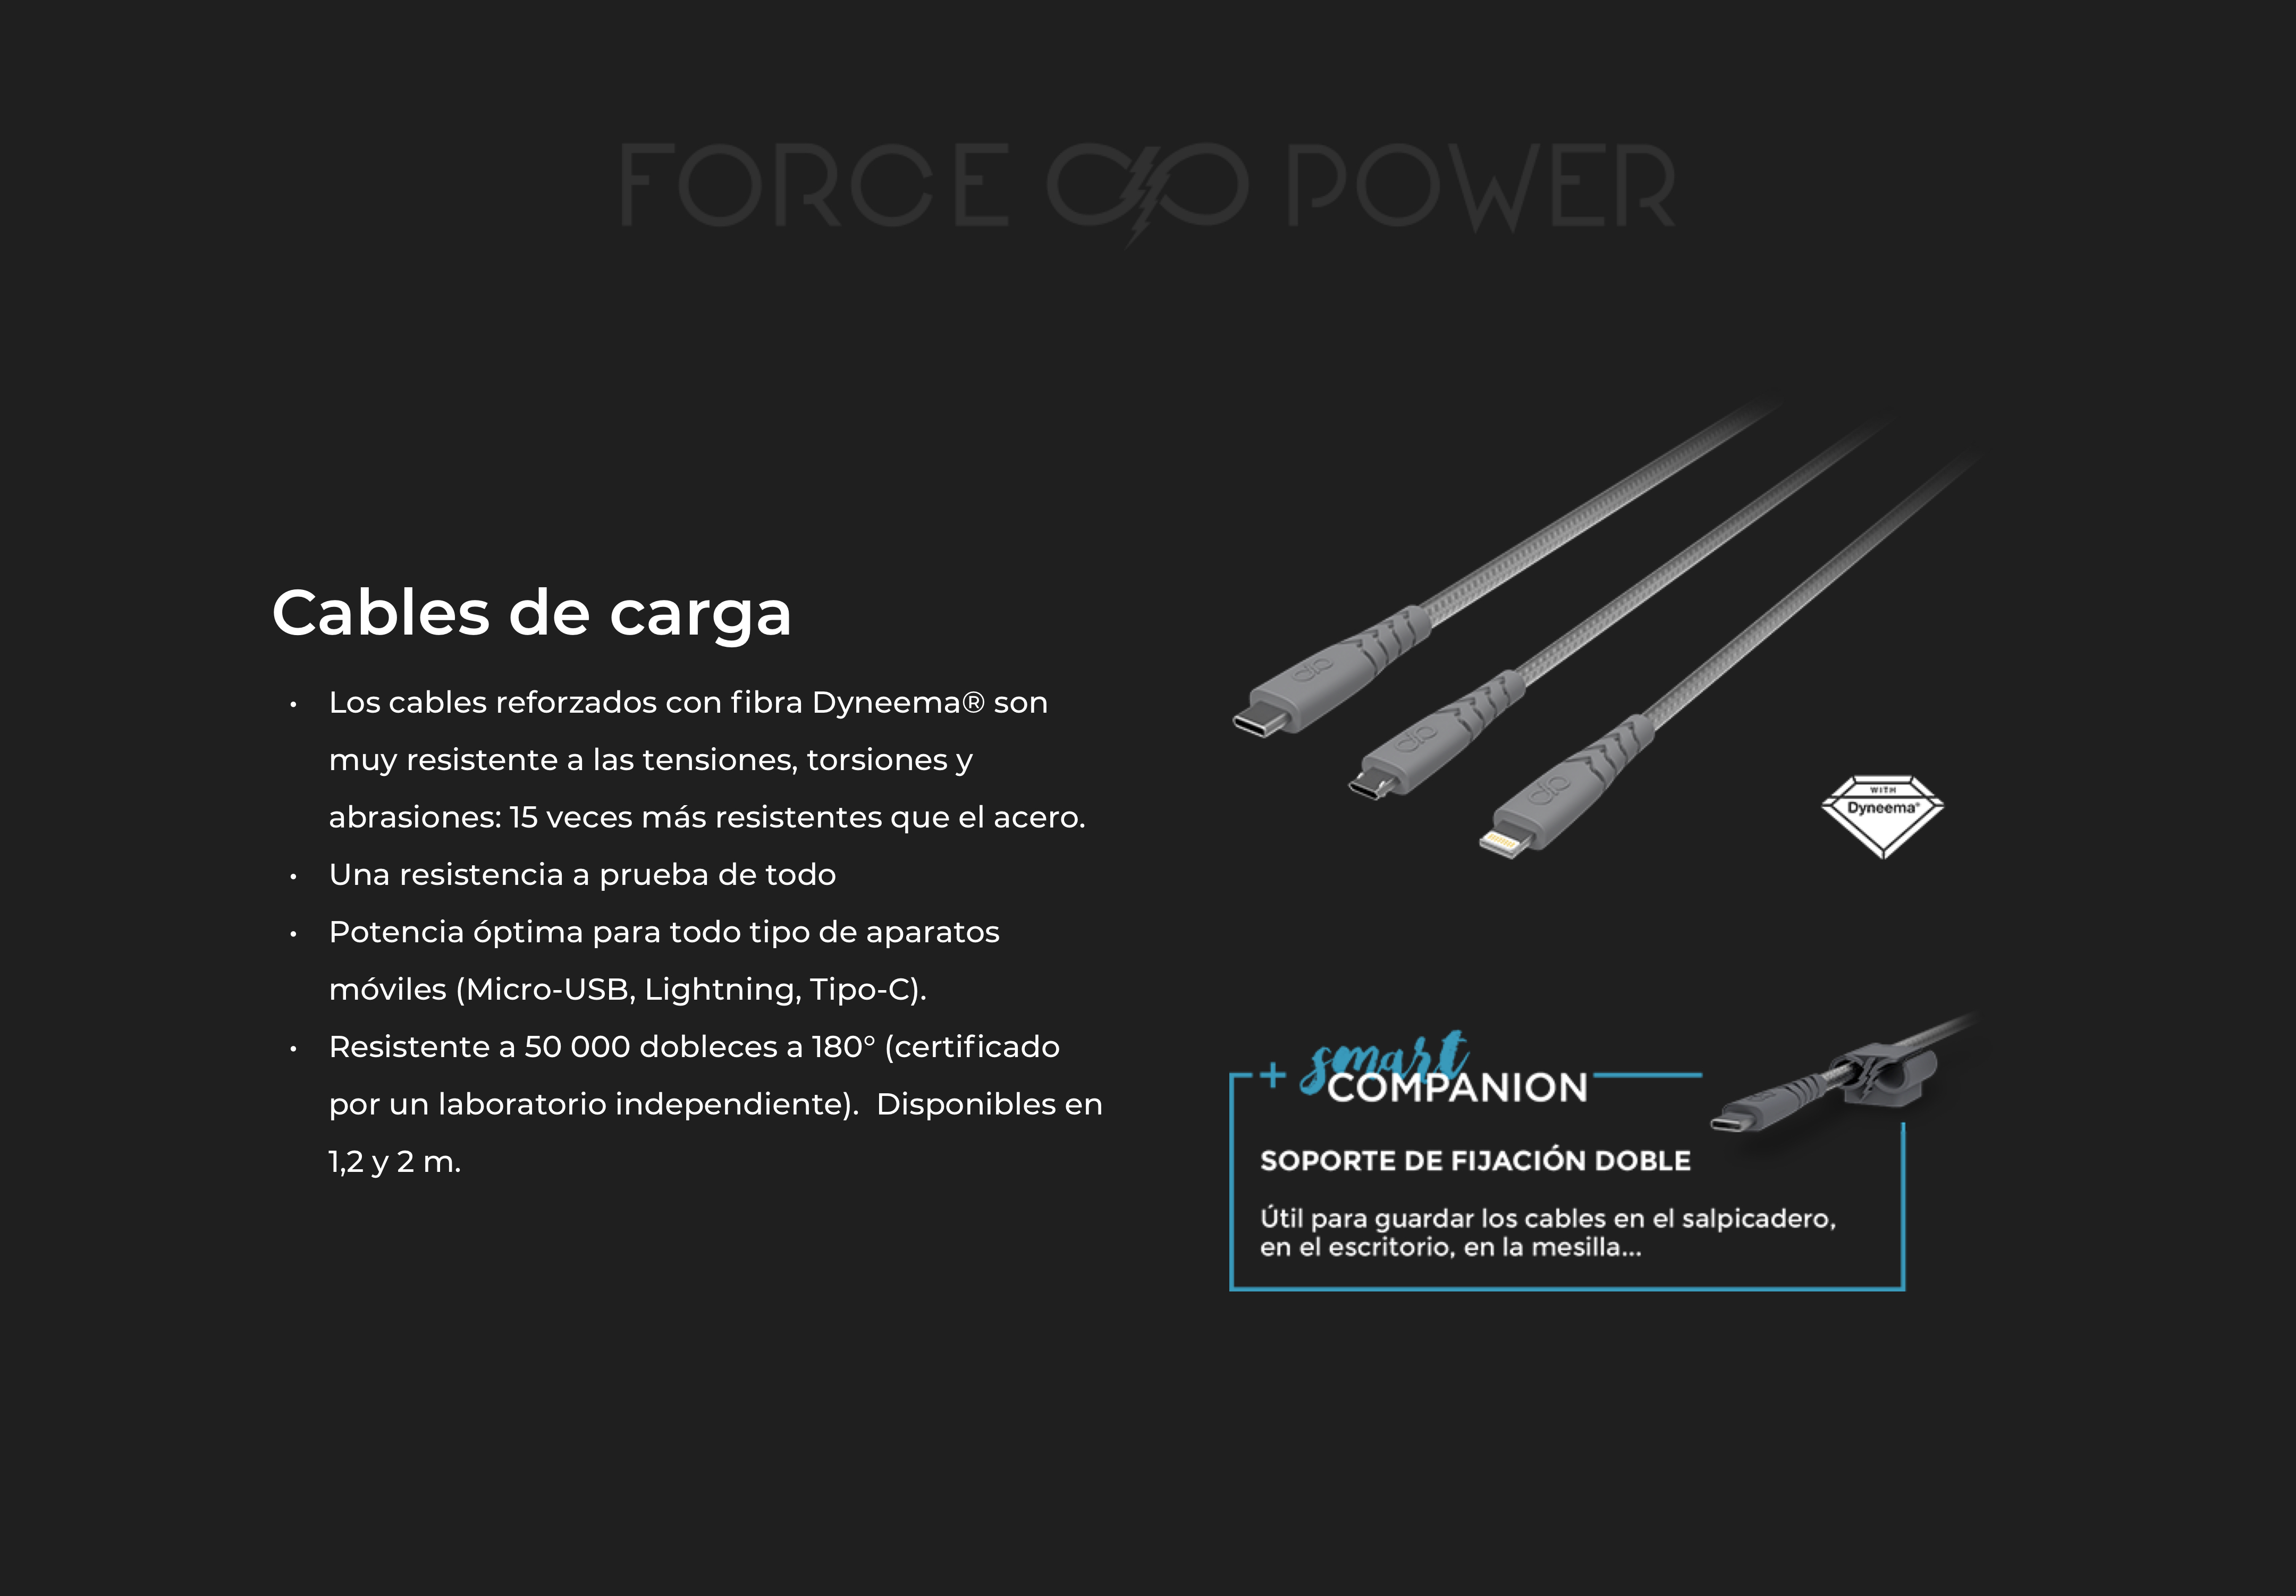 Microsite Force Power